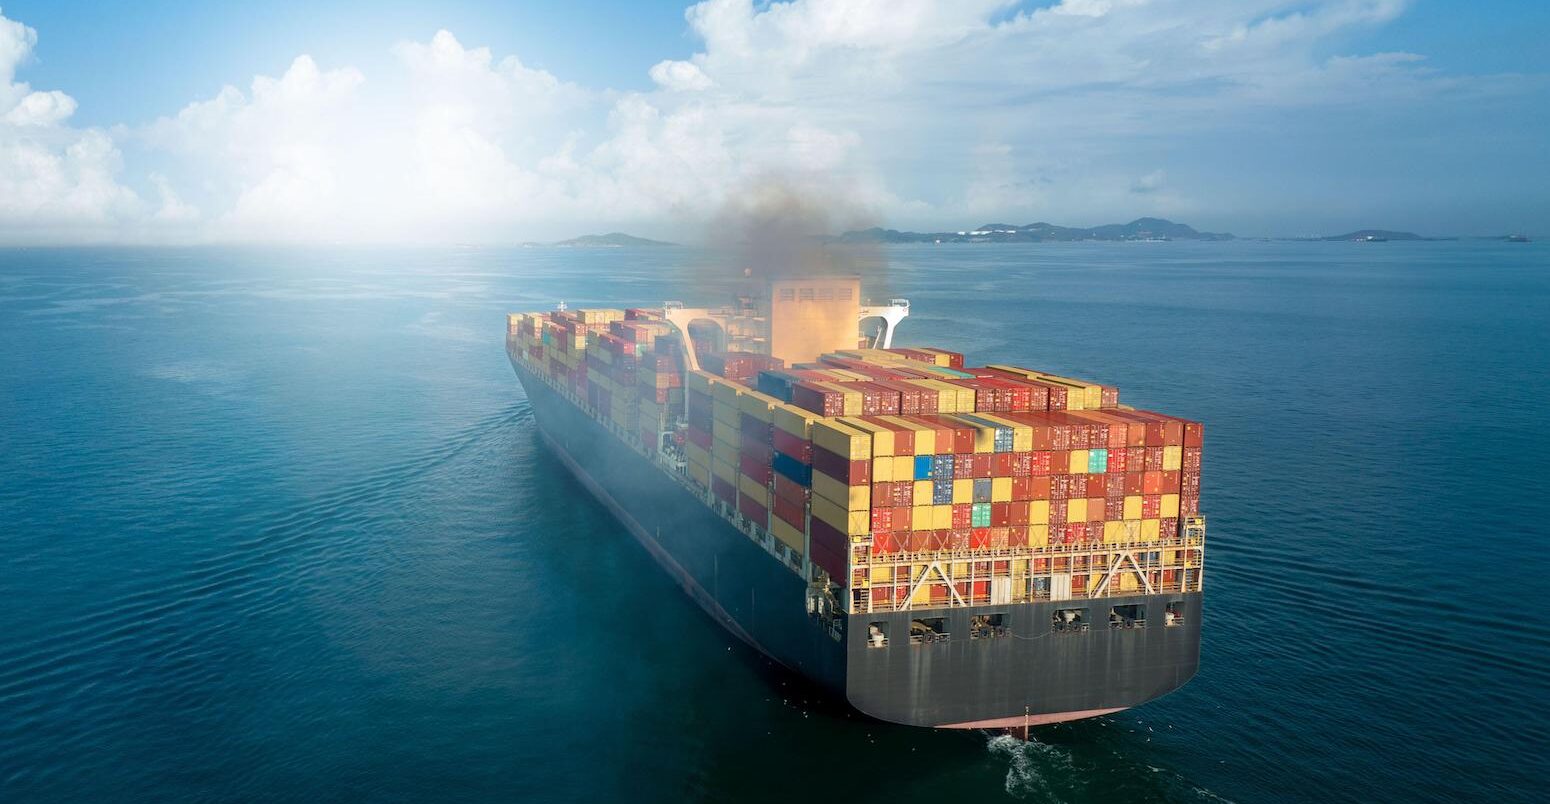 A large cargo ship in motion.